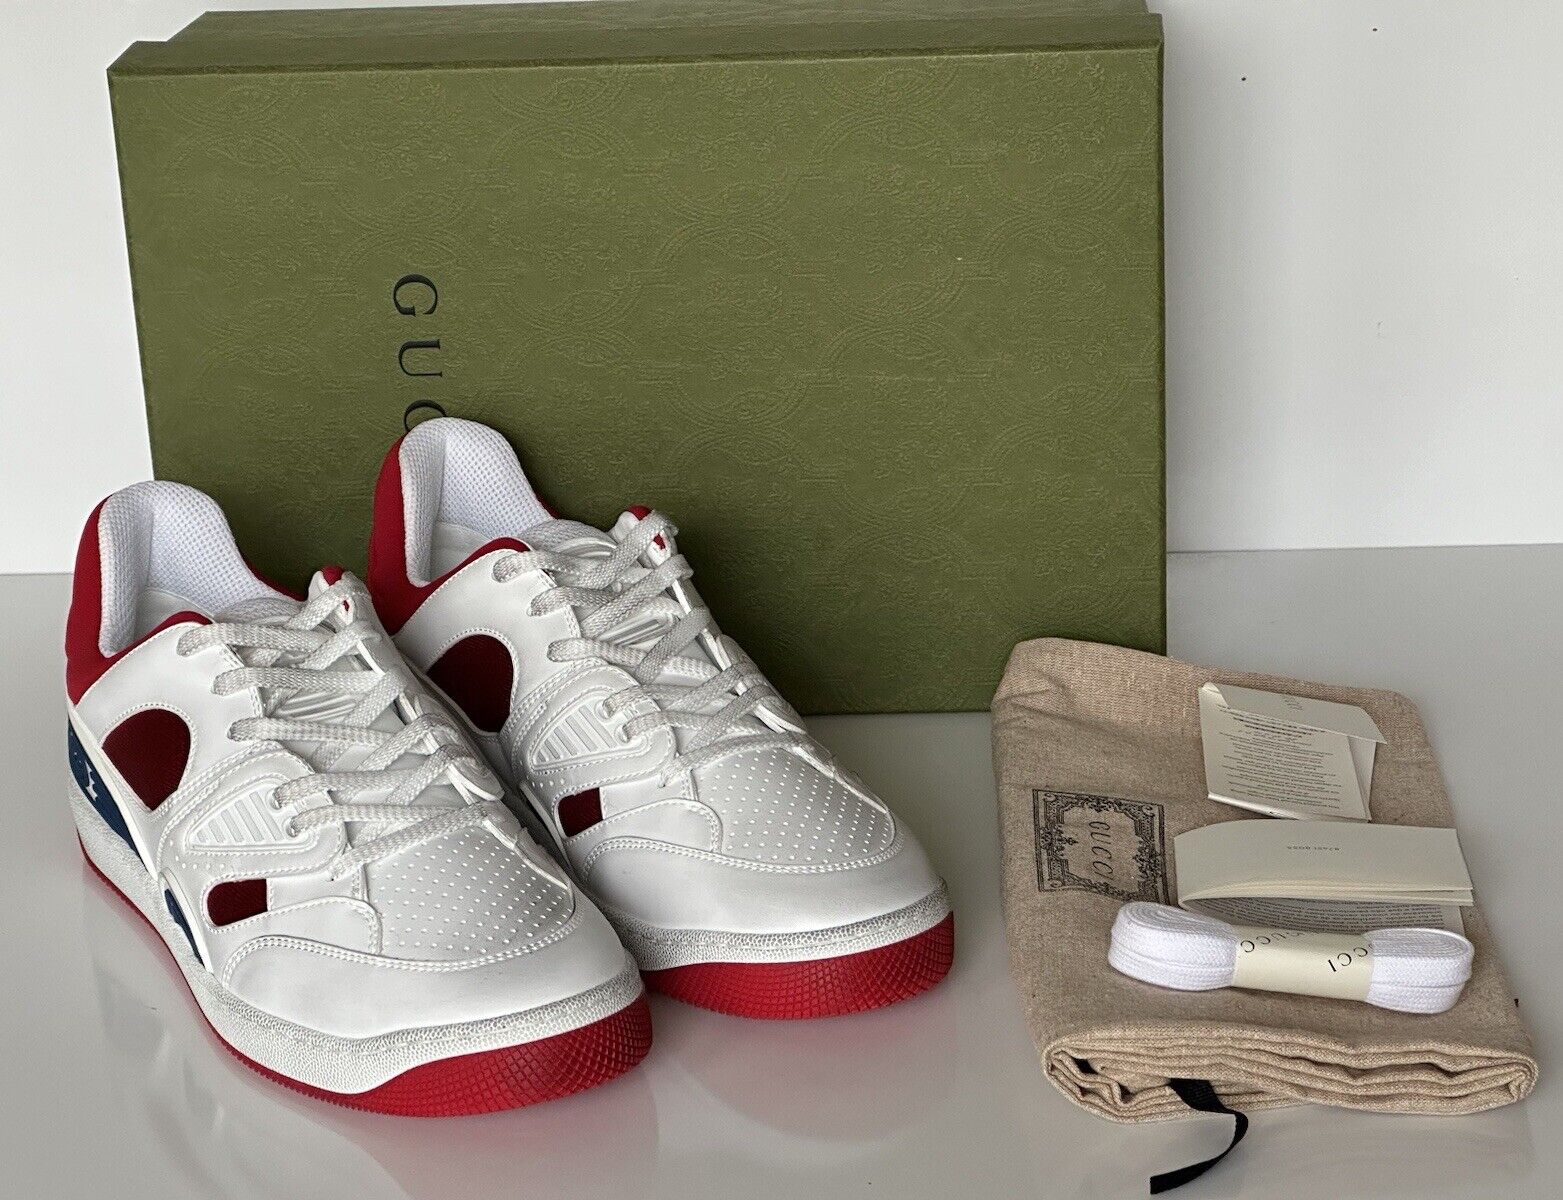 NIB Gucci Men's Low-top White/Red Leather Sneakers 10.5 US (Gucci 10G) 697882 IT